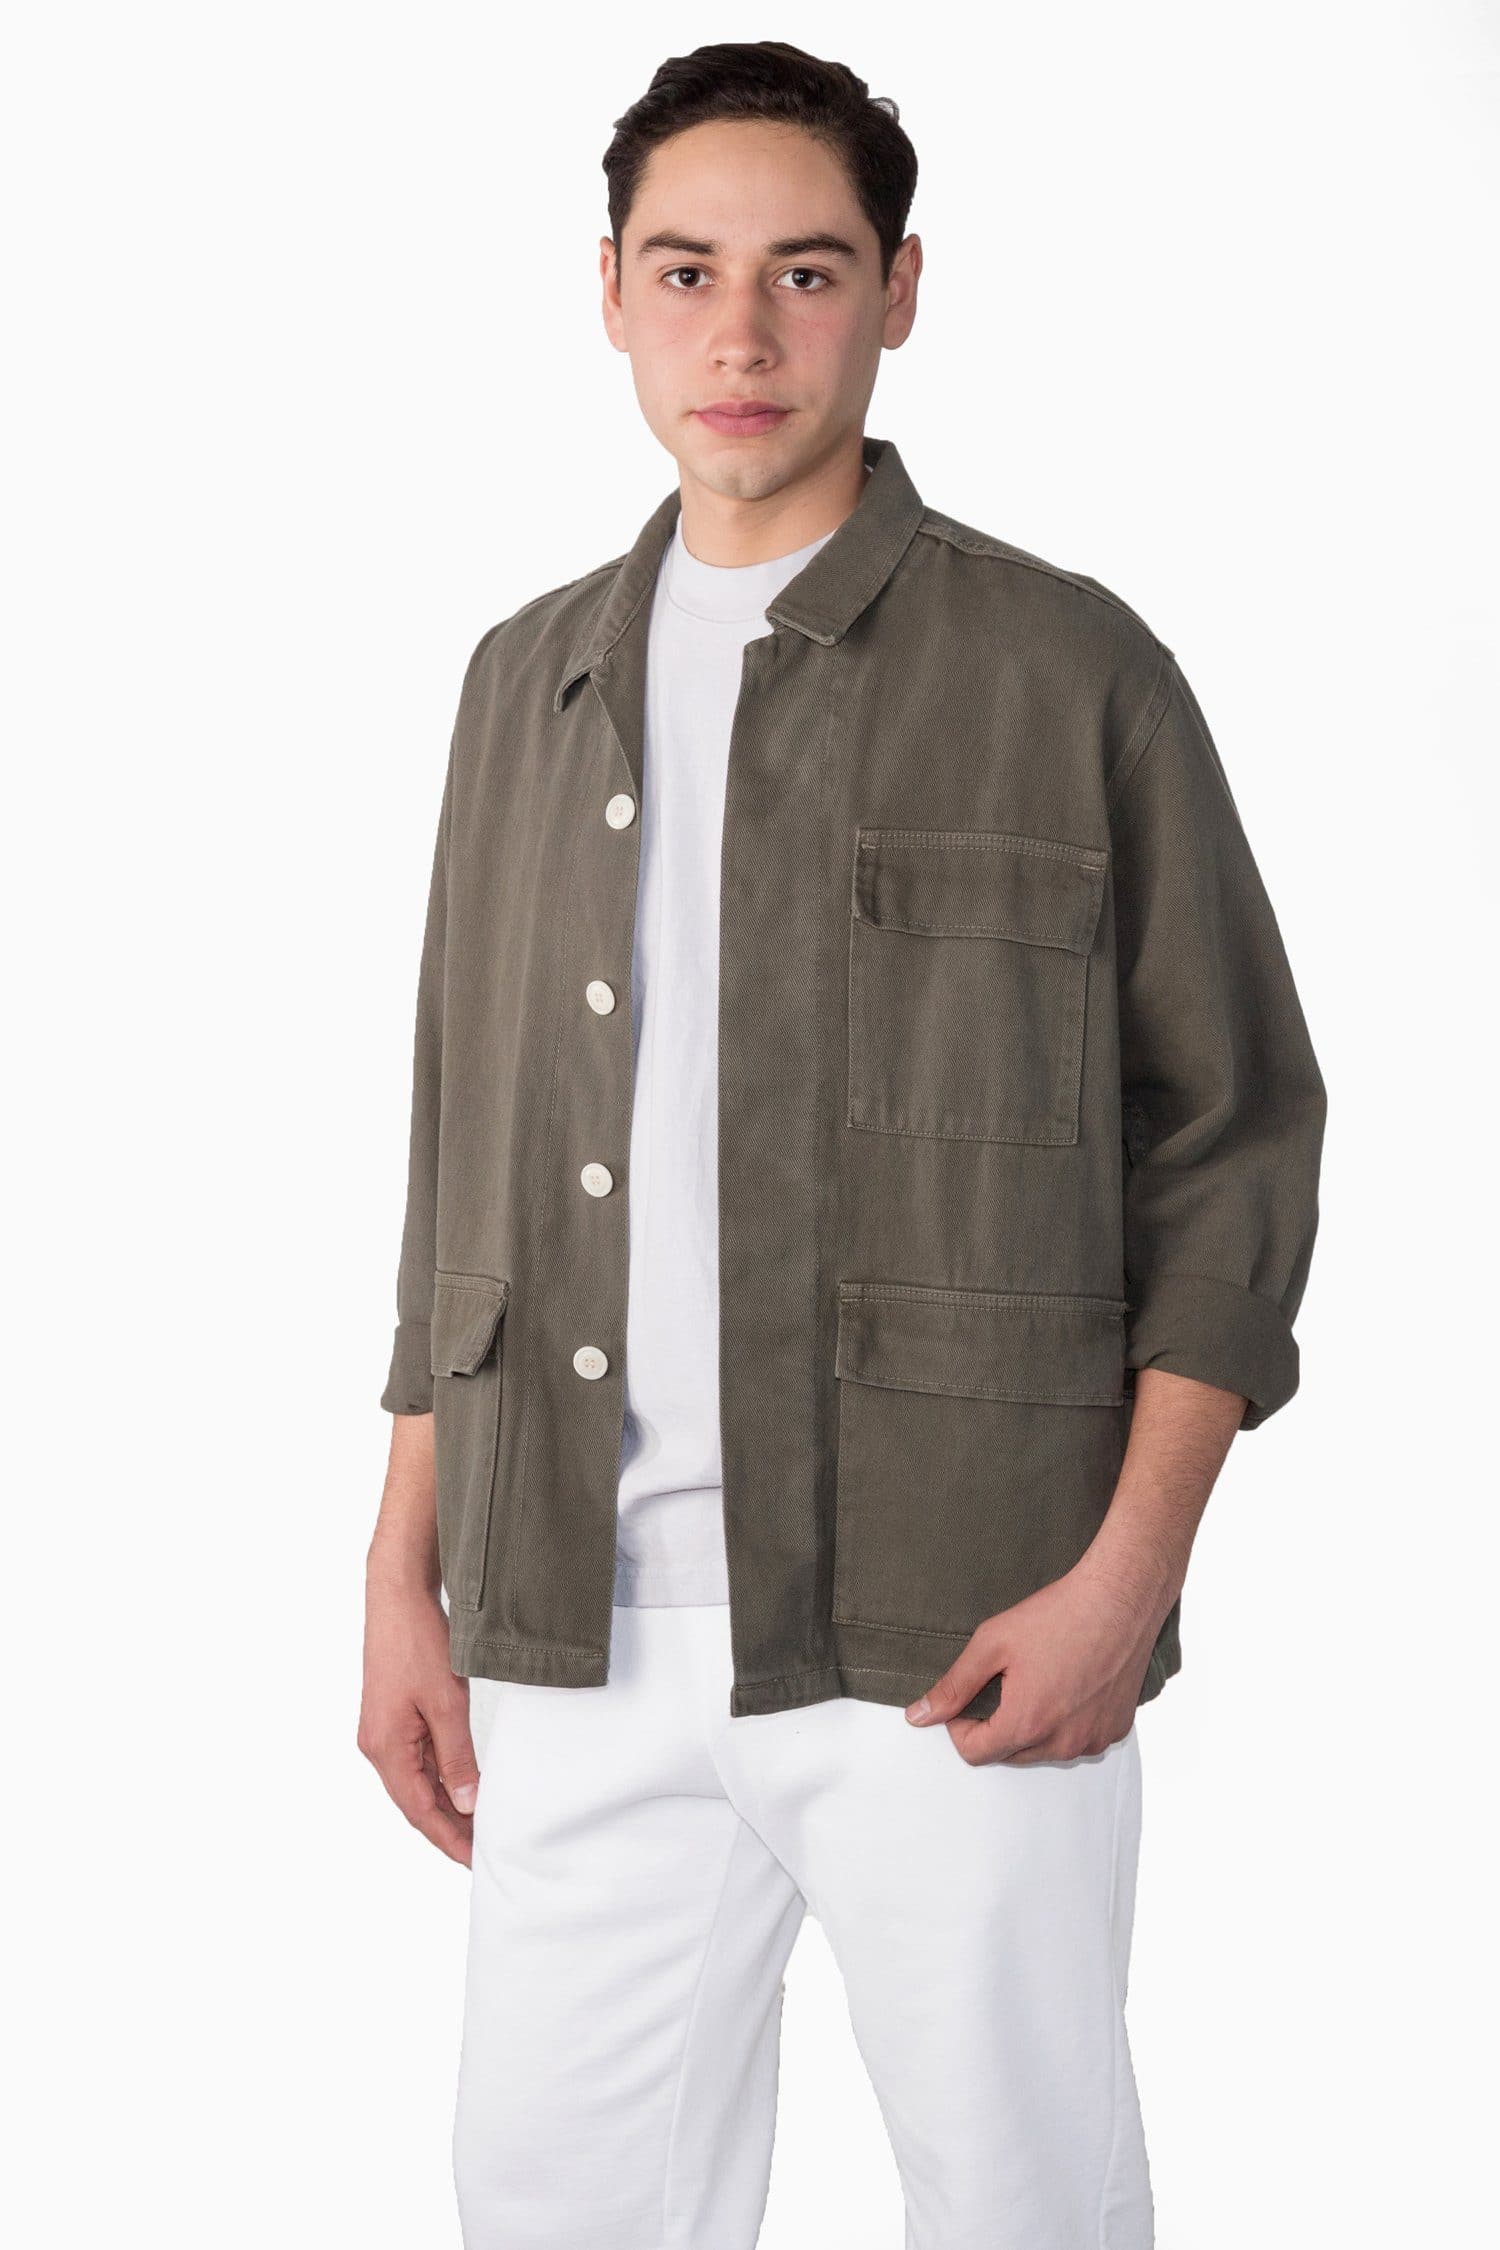 RCT400GD - 12 Oz. Cotton Twill Military Jacket